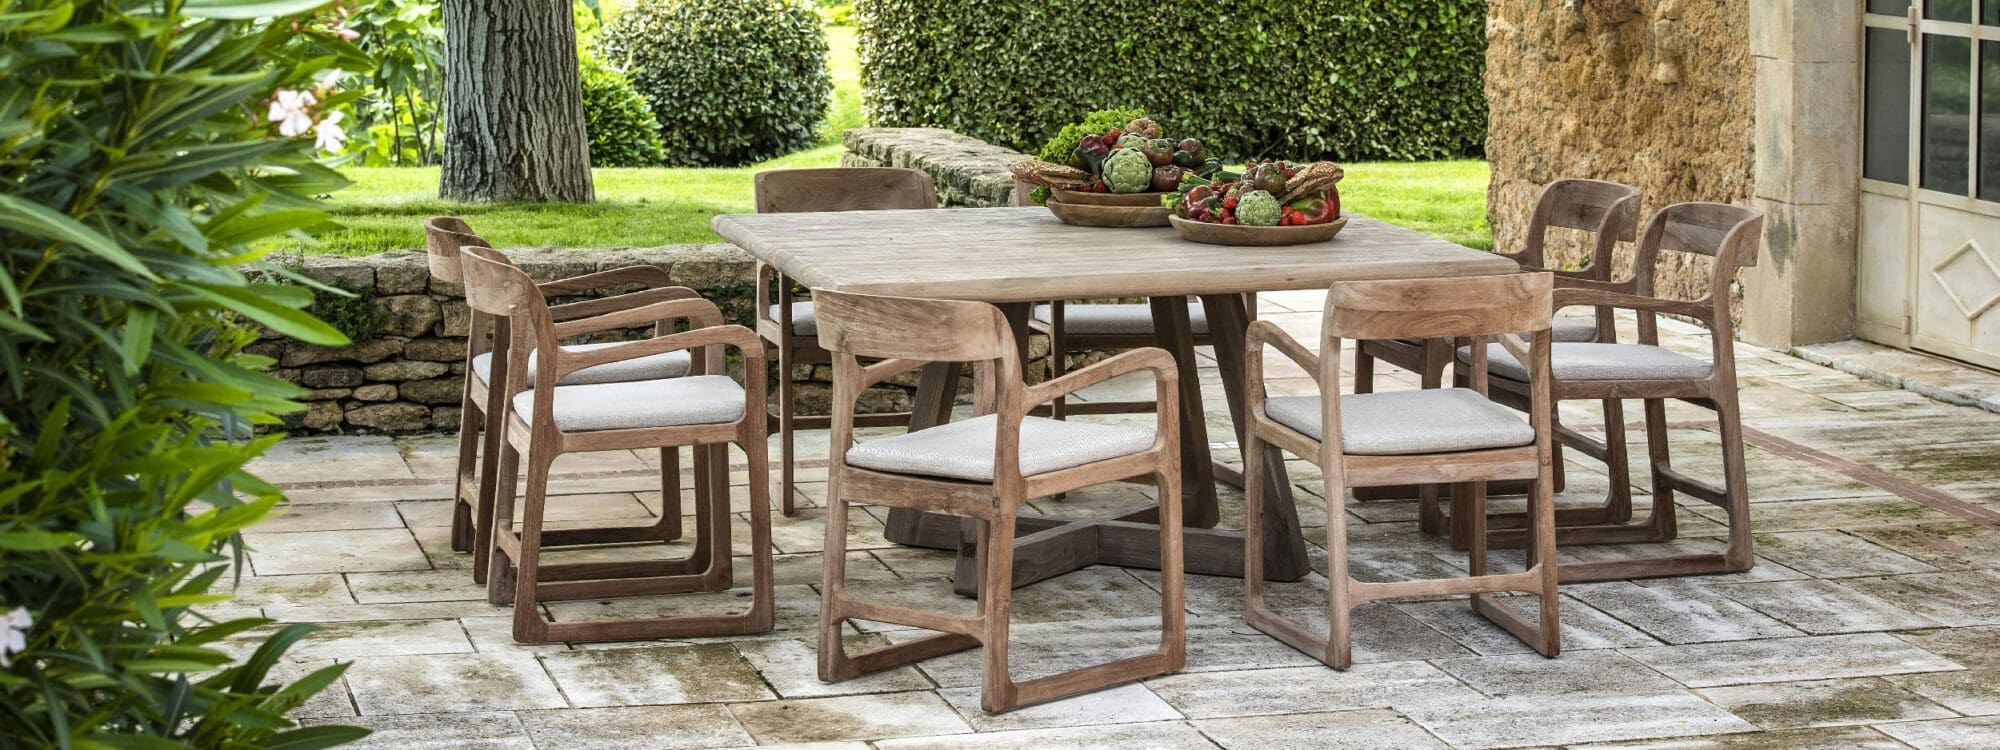 Image of Sally teak armchair and Dennis square teak dining table by Gommaire